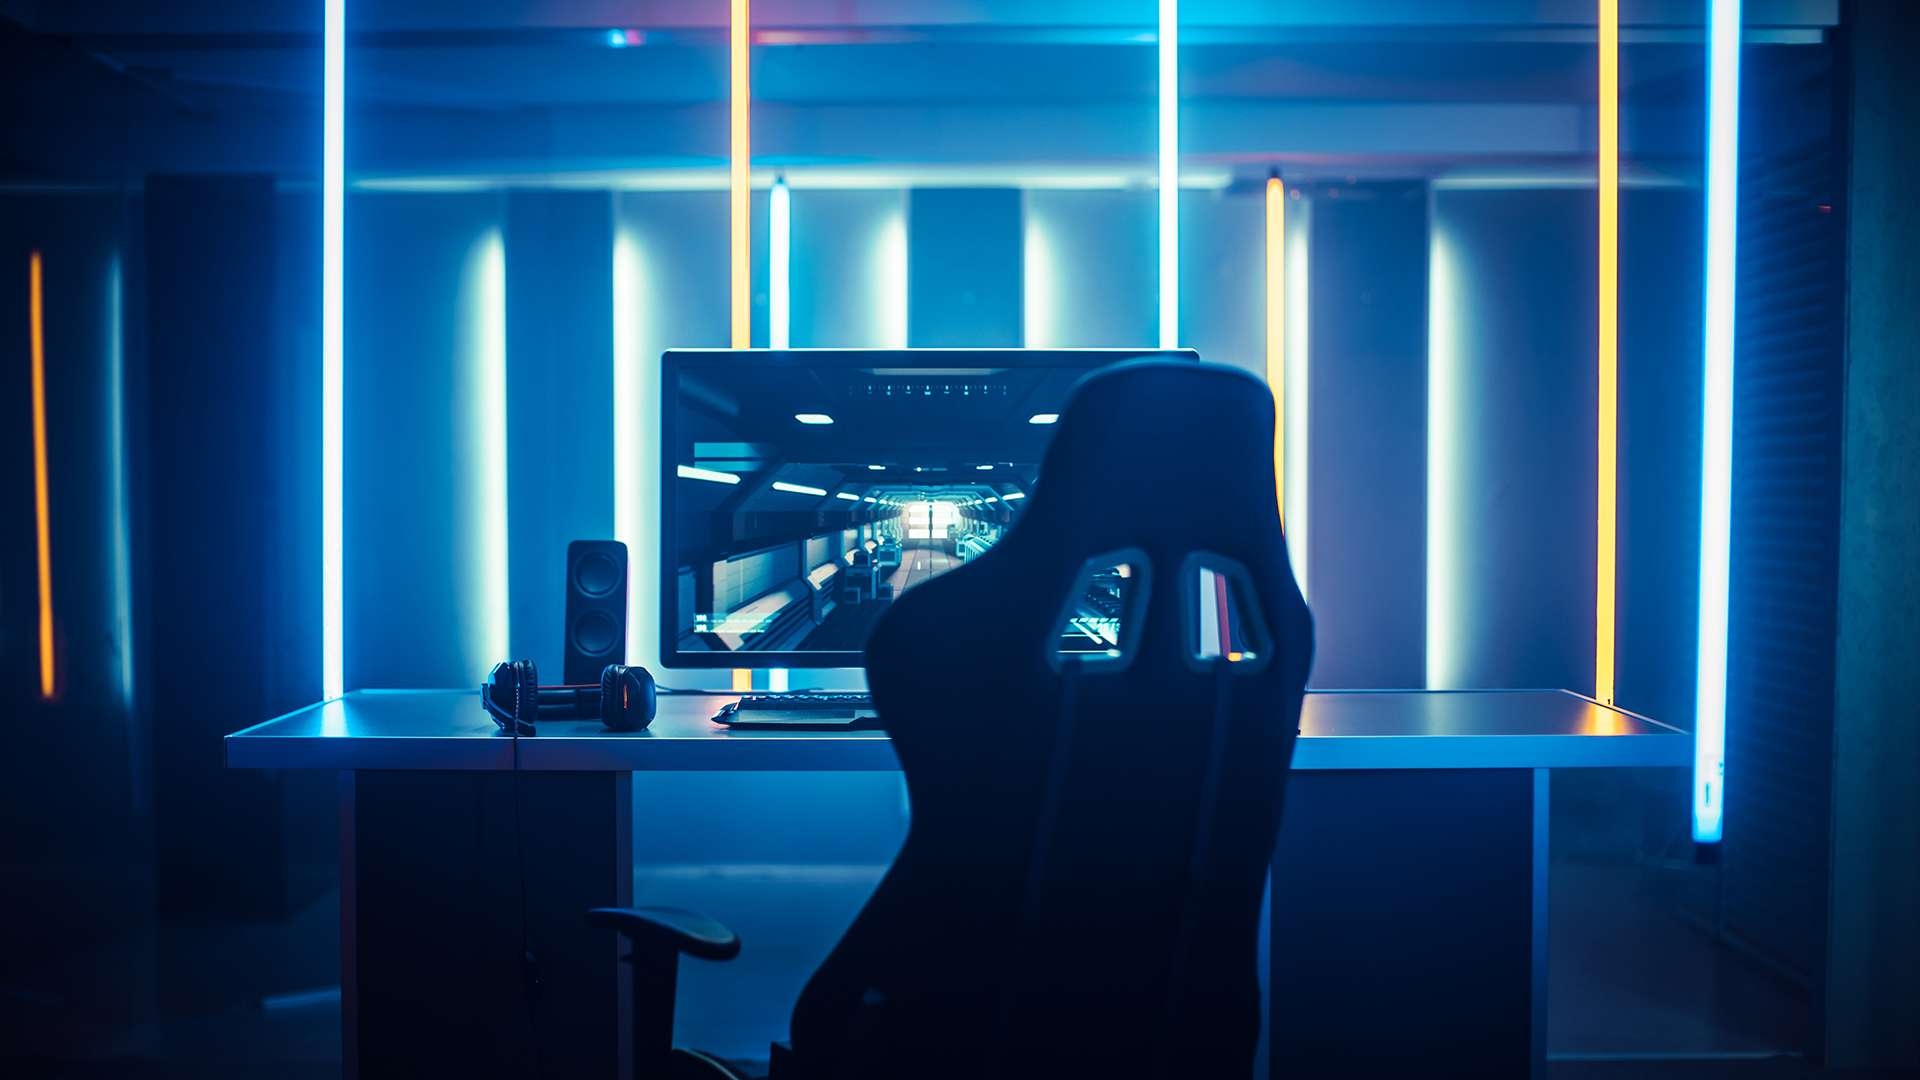 Gaming room with powerful personal computer